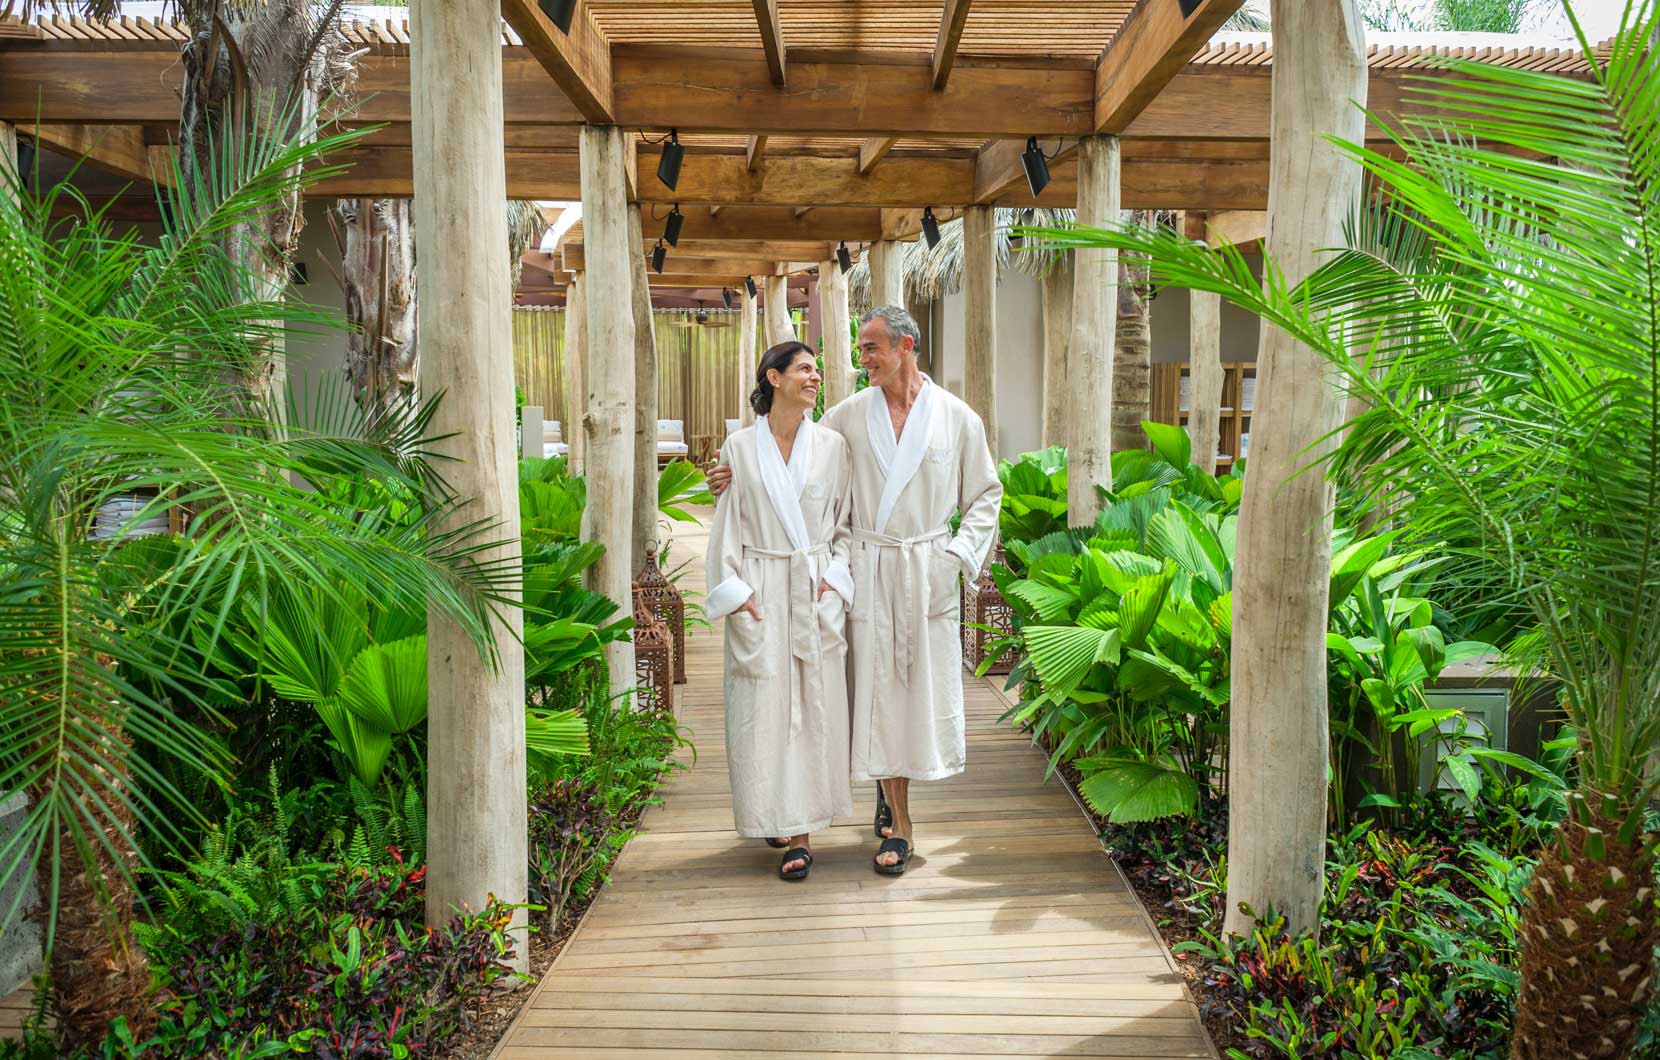 Guests that select this program enjoy relaxing spa time at Brio or Spatium.